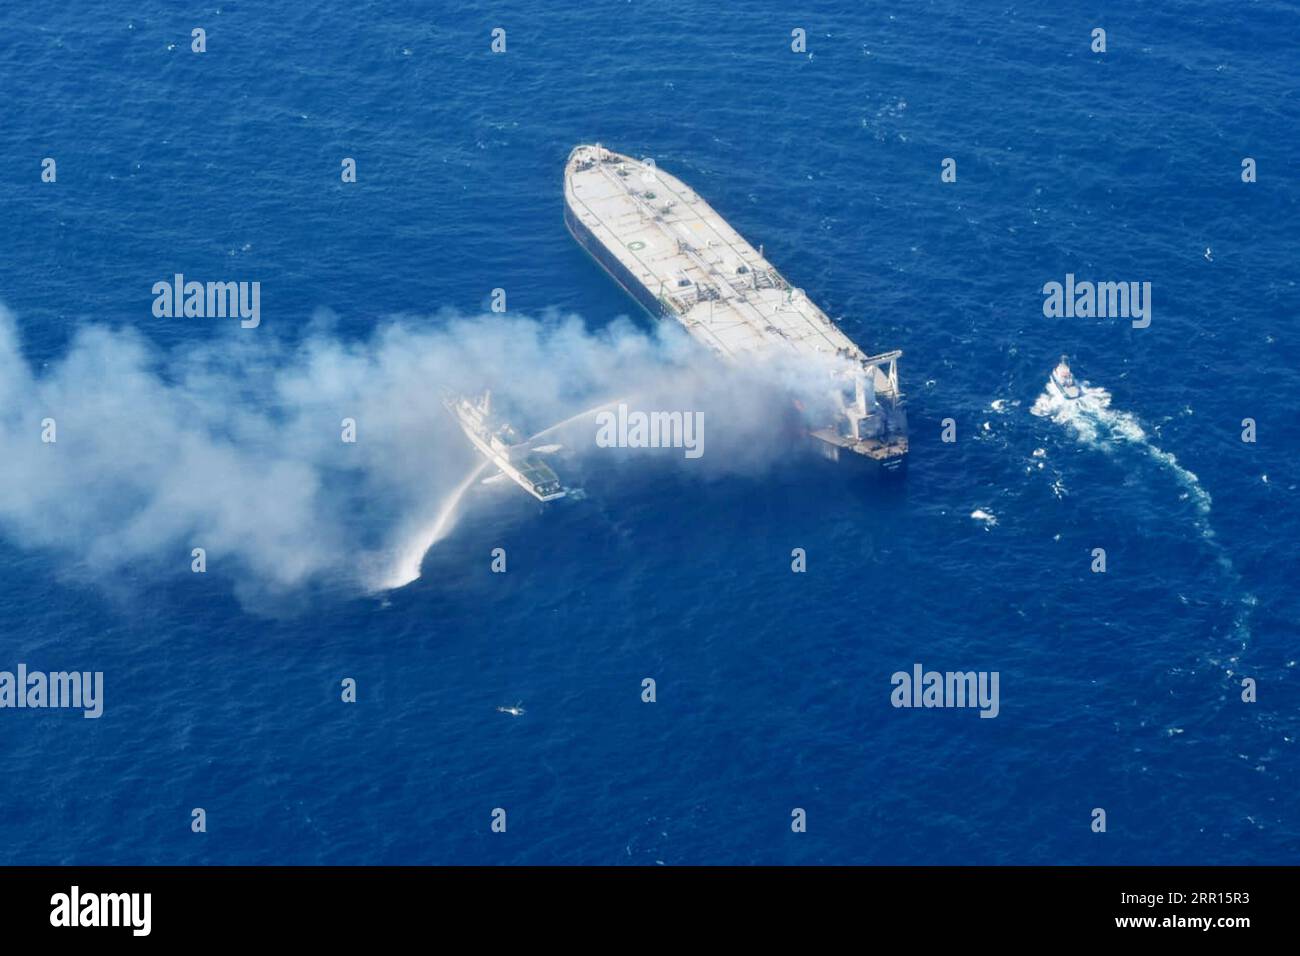 200905 -- COLOMBO, Sept. 5, 2020  -- Fireboats extinguish fire of an oil tanker in the seas off Sri Lanka s eastern coast, on Sept. 5, 2020. The distressed oil tanker MT New Diamond which caught fire in the seas off Sri Lanka s eastern coast on Thursday has been towed 40 nautical miles away from shore and the fire is under control, the Sri Lanka navy said here Saturday. Sri Lanka Air Force Media/Handout via  SRI LANKA-OIL TANKER-FIRE Xinhua PUBLICATIONxNOTxINxCHN Stock Photo